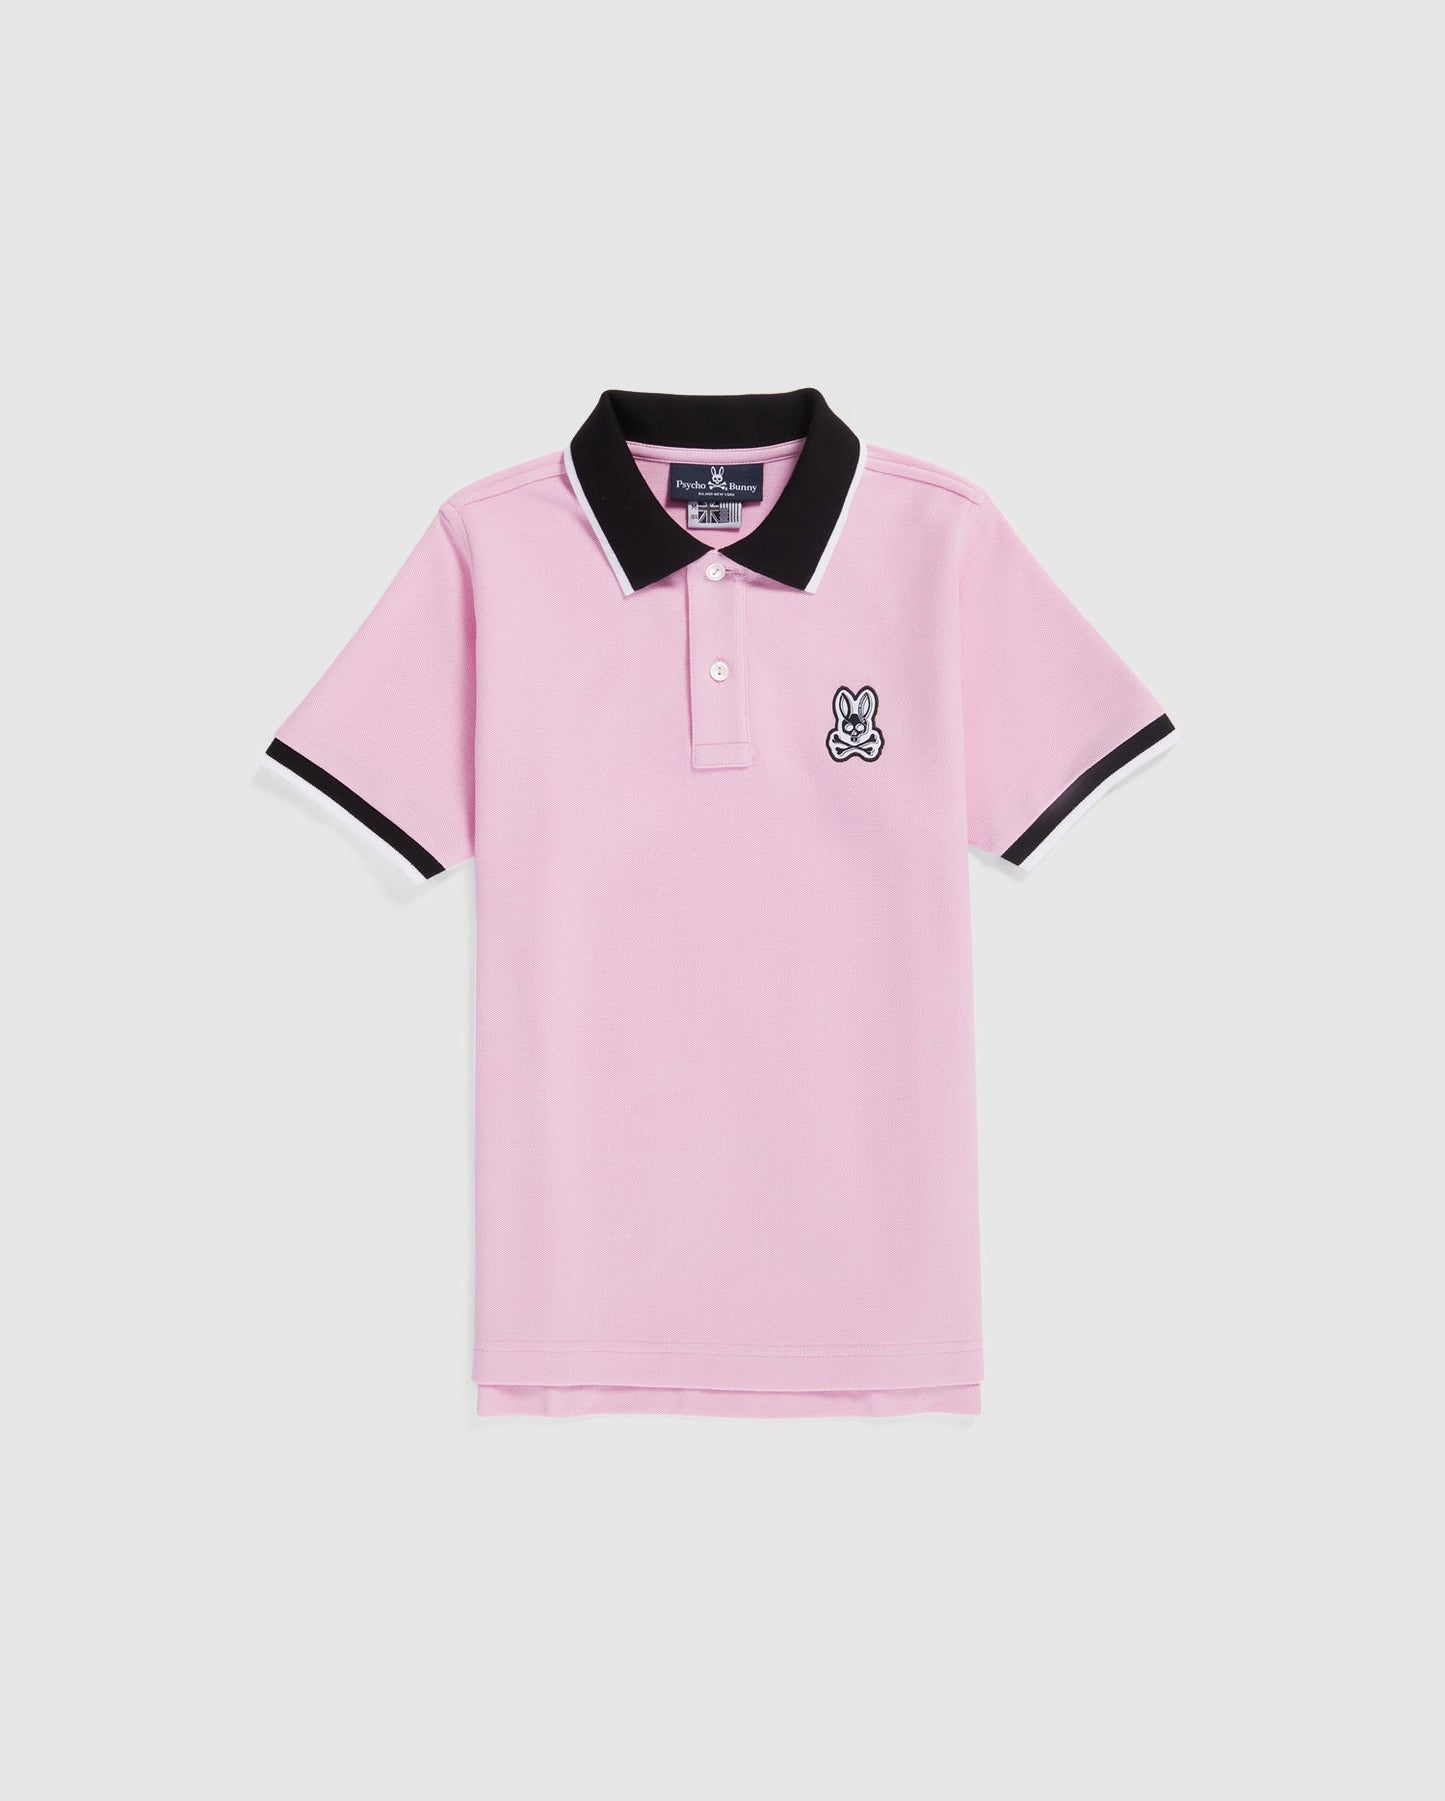 Vintage Charm: Classic Pique Polo Shirt in Light Pink